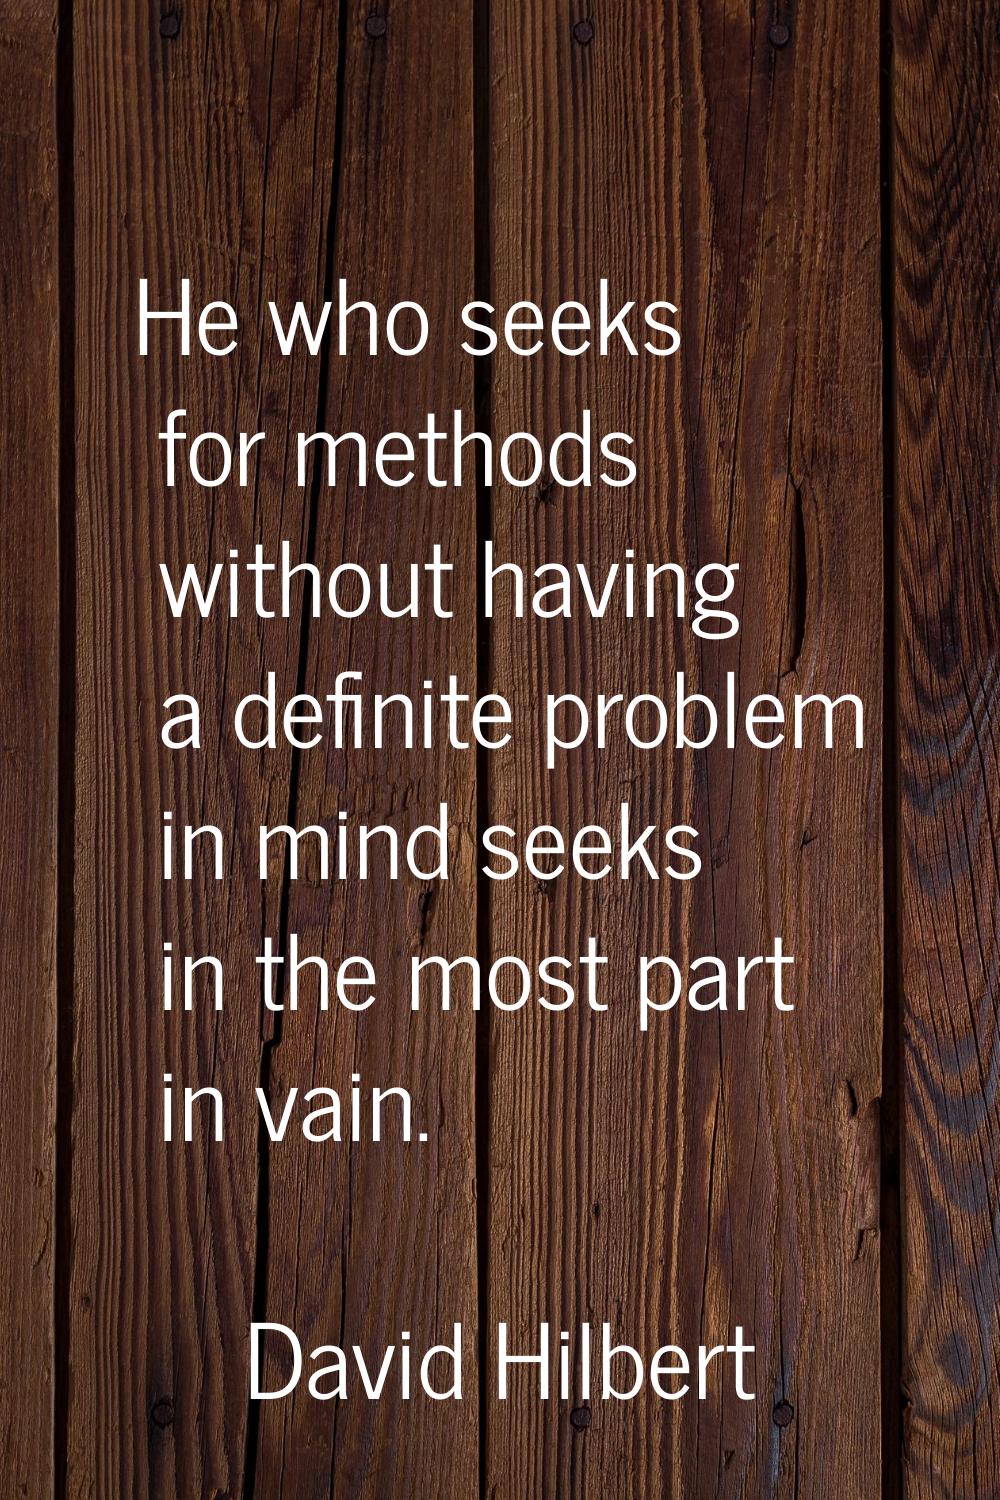 He who seeks for methods without having a definite problem in mind seeks in the most part in vain.